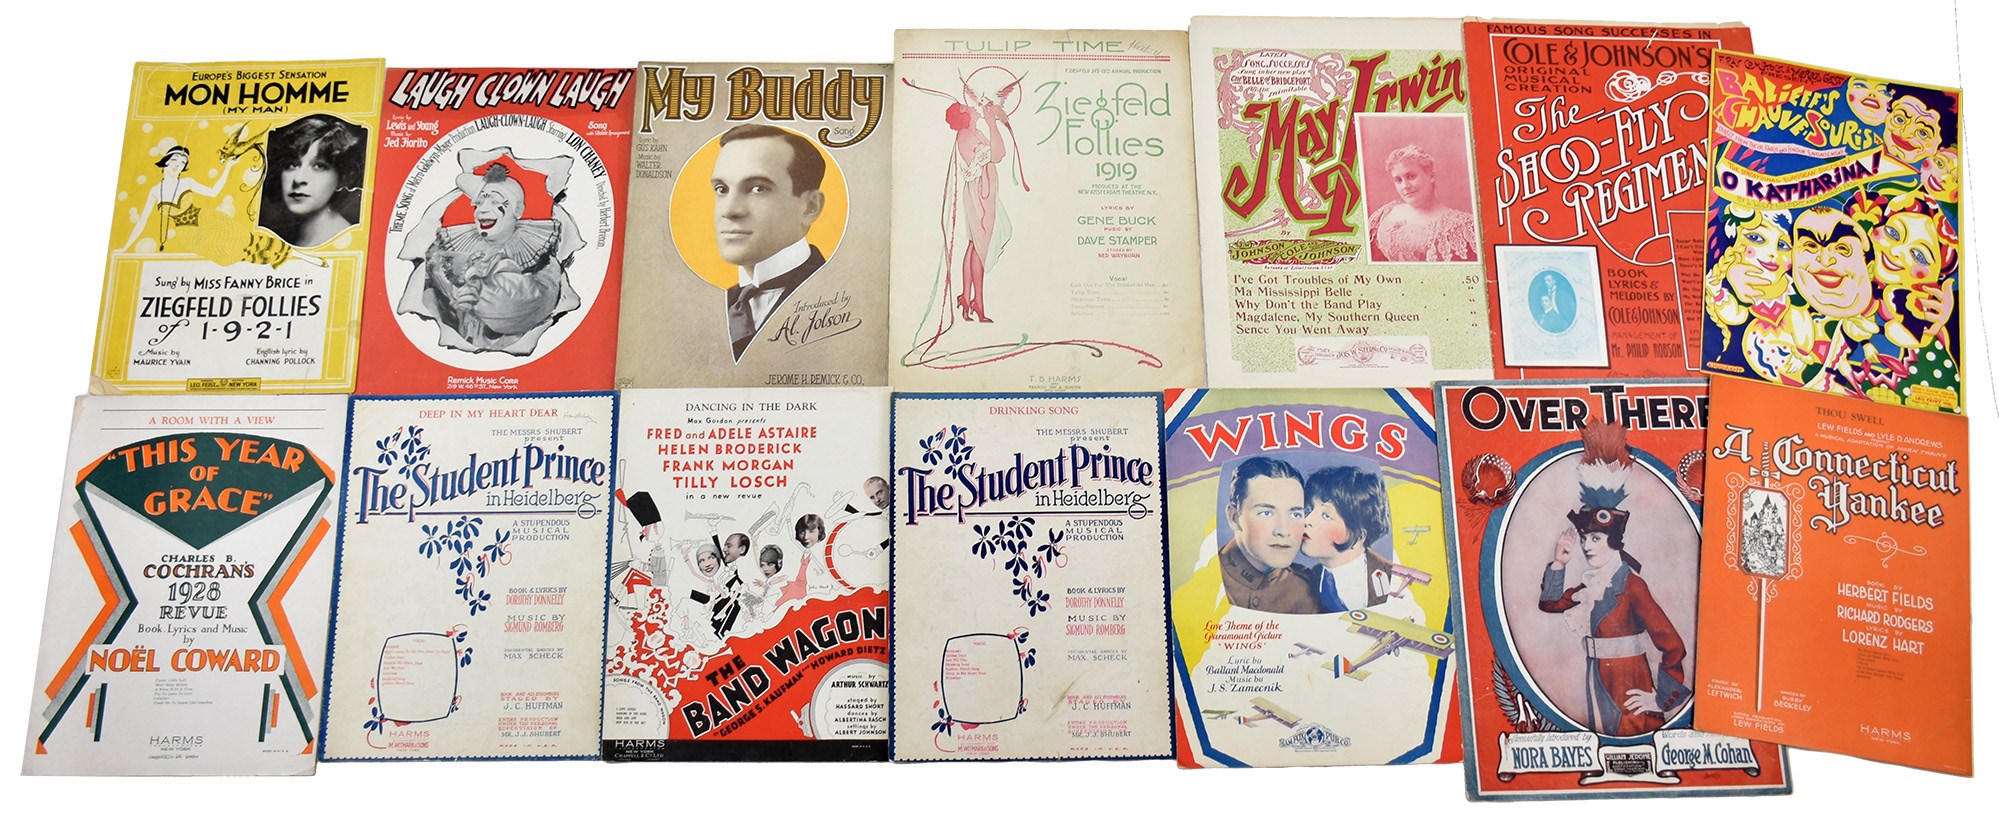 The New Yorker Collection - Sheet Music Collection (175+)